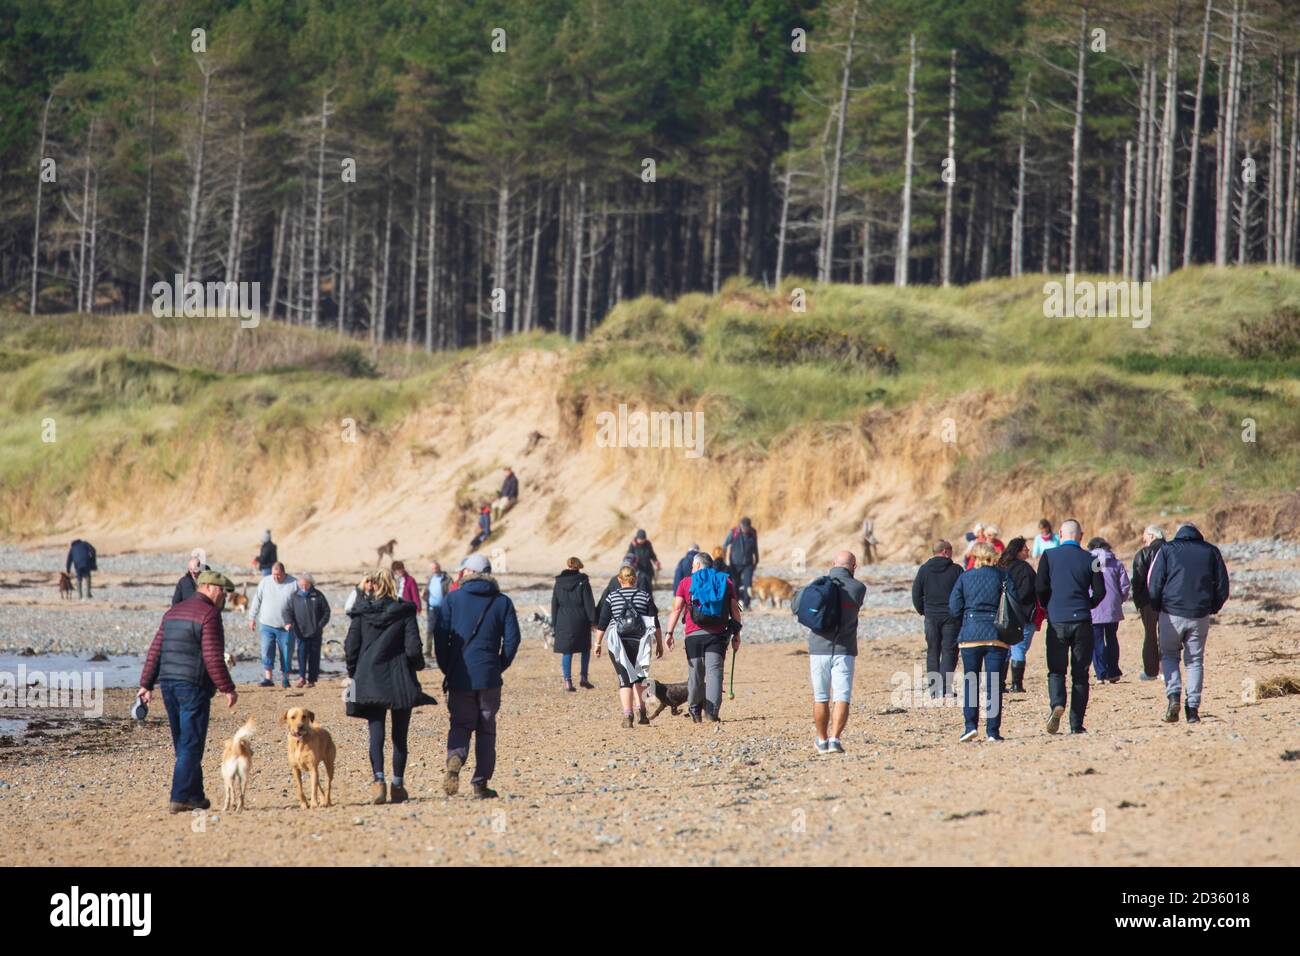 Newborough, Anglesey, North Wales, UK. UK Weather: 7th October 2020 a fine warm day on Anglesey in between weather fronts, with another rain front expected to hit the UK on Friday. Beach goers enjoying the warm pleasant weather on Newborough Beach, Anglesey © DGDImages/AlamyNews Stock Photo